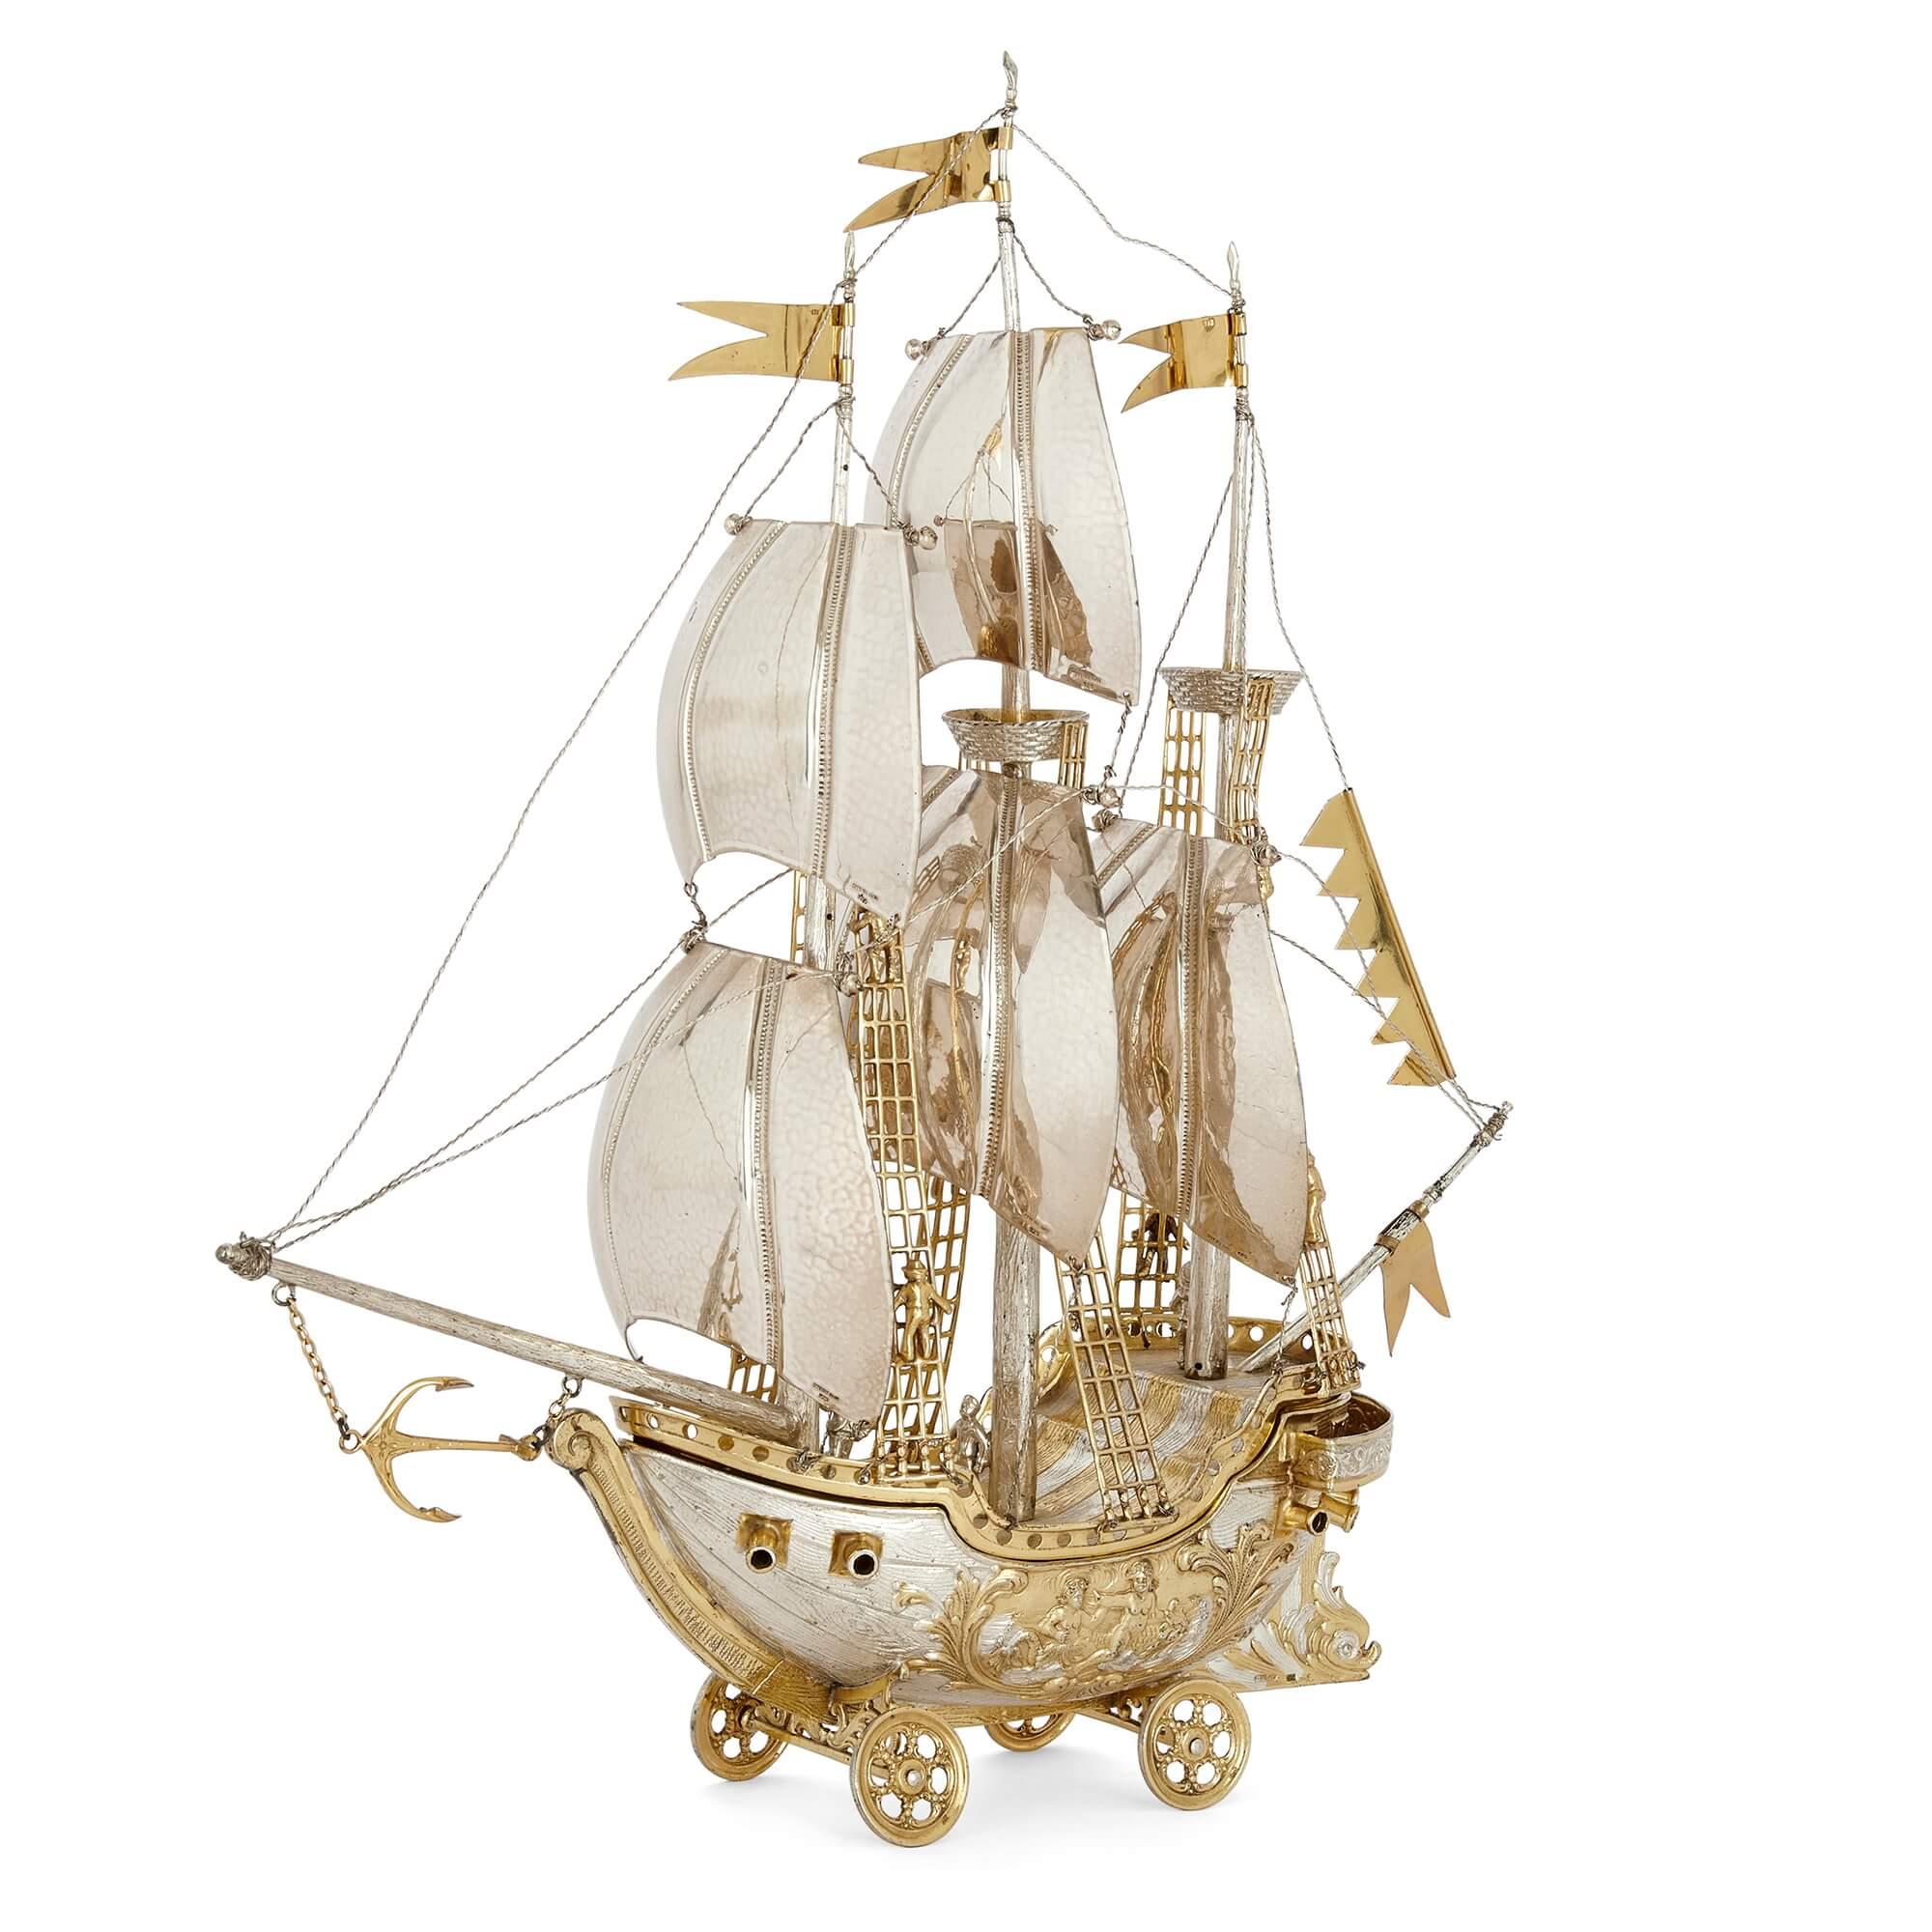 Silver and silver gilt nef sailing ship 
Continental, 20th Century 
Height 44cm, width 38cm, depth 12cm

Made from silver and silver gilt, this nef, also known as a model ship, is brilliantly formed to depict a galleon. Historically, pieces like